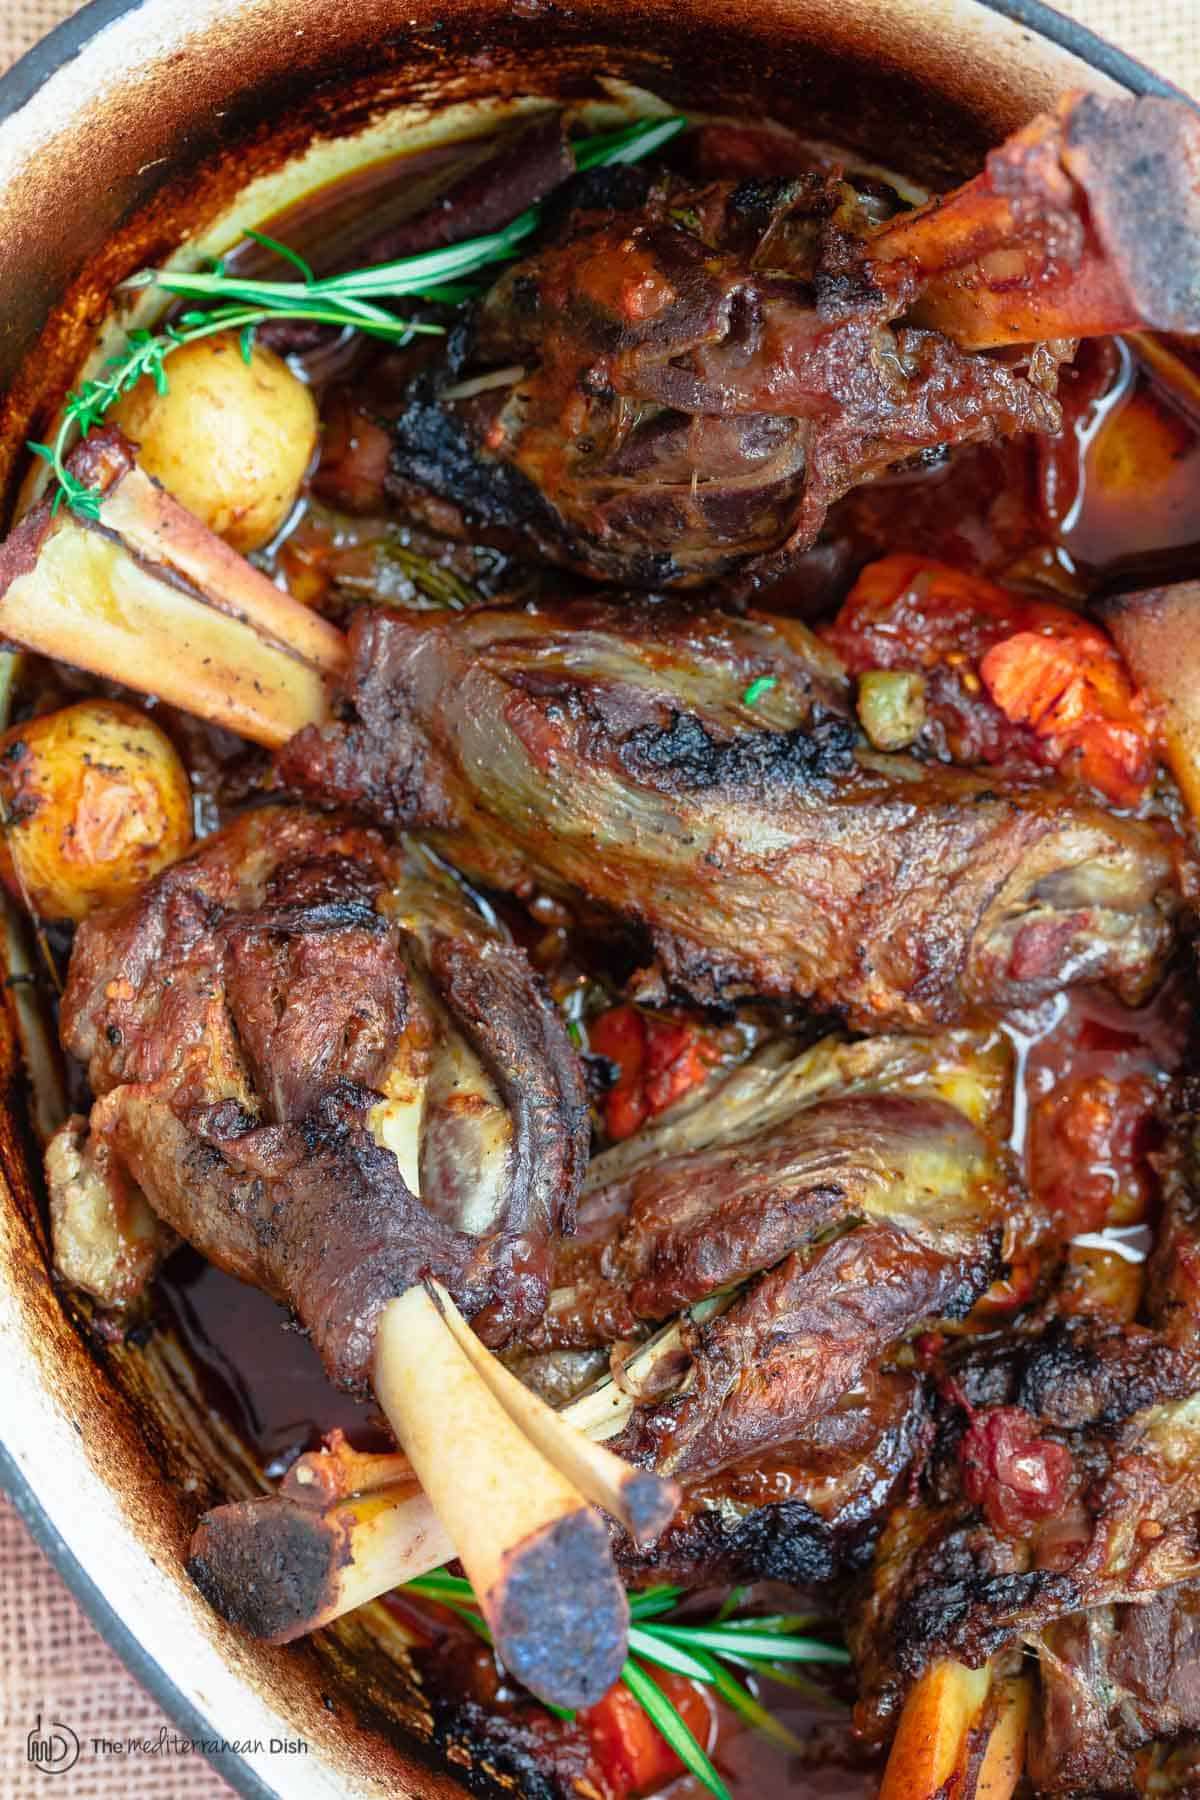 Braised Lamb Shanks with Vegetables-How to Cook Lamb Shanks